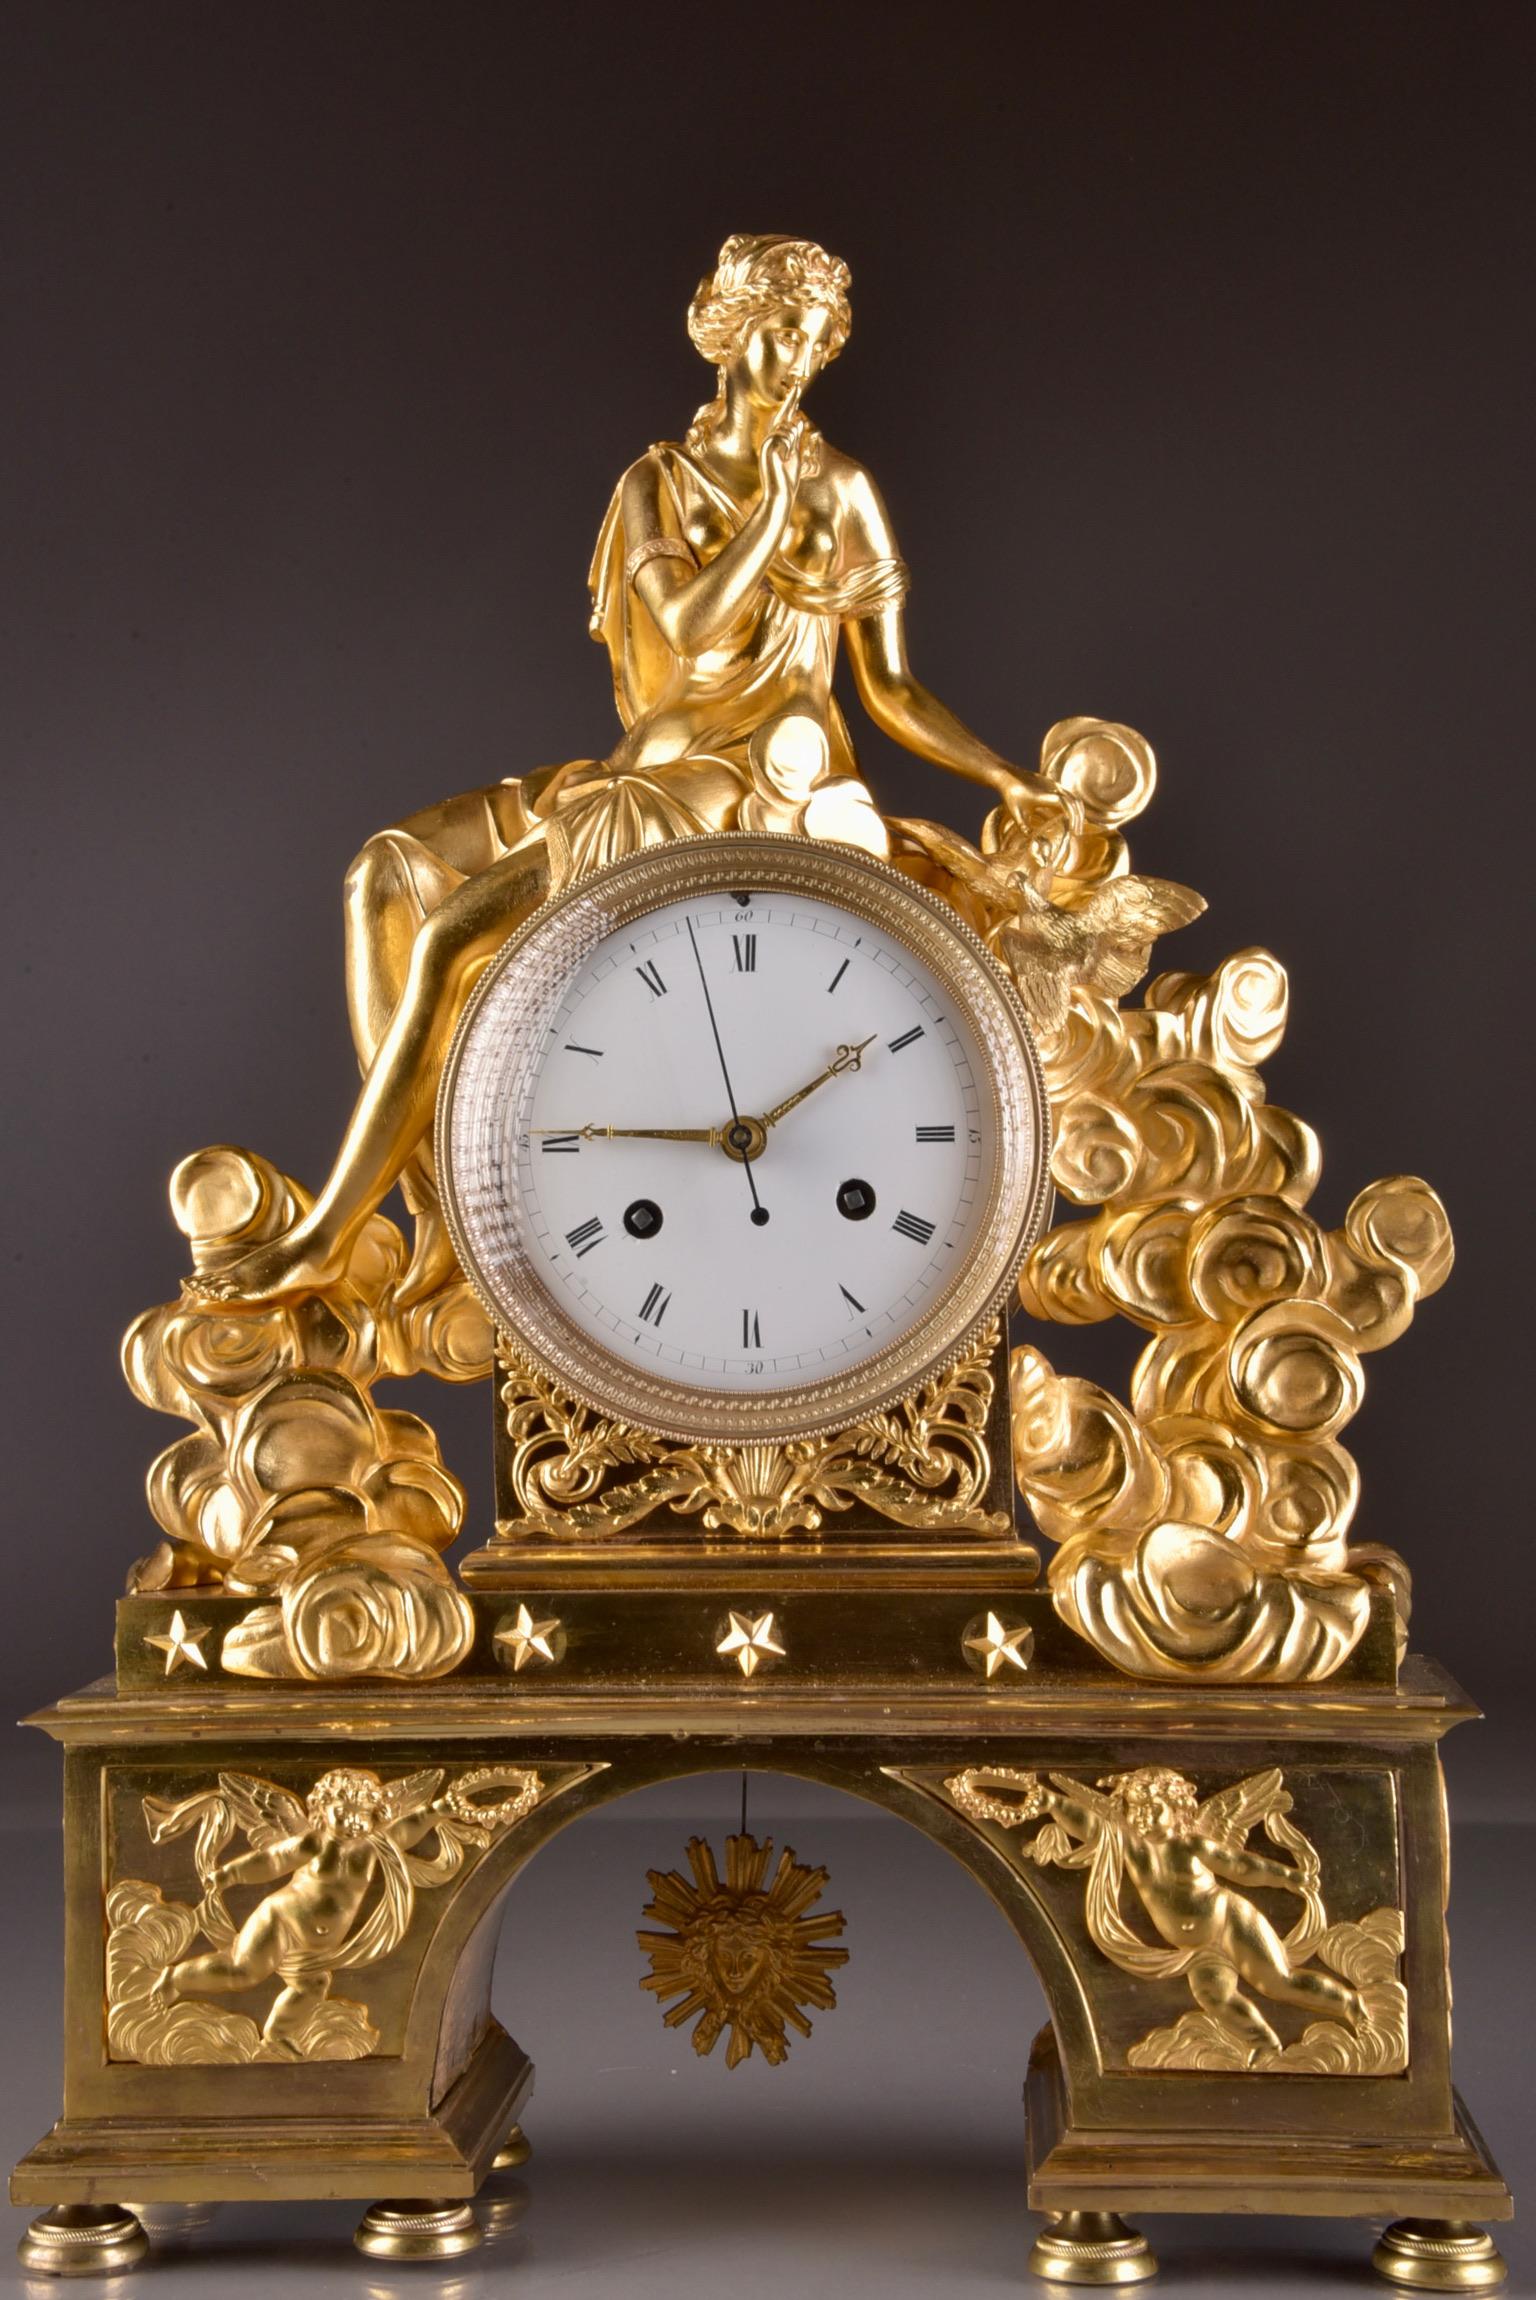 Rare Large Romantic French Directoire Mantel Clock, Late 18th C For Sale 2